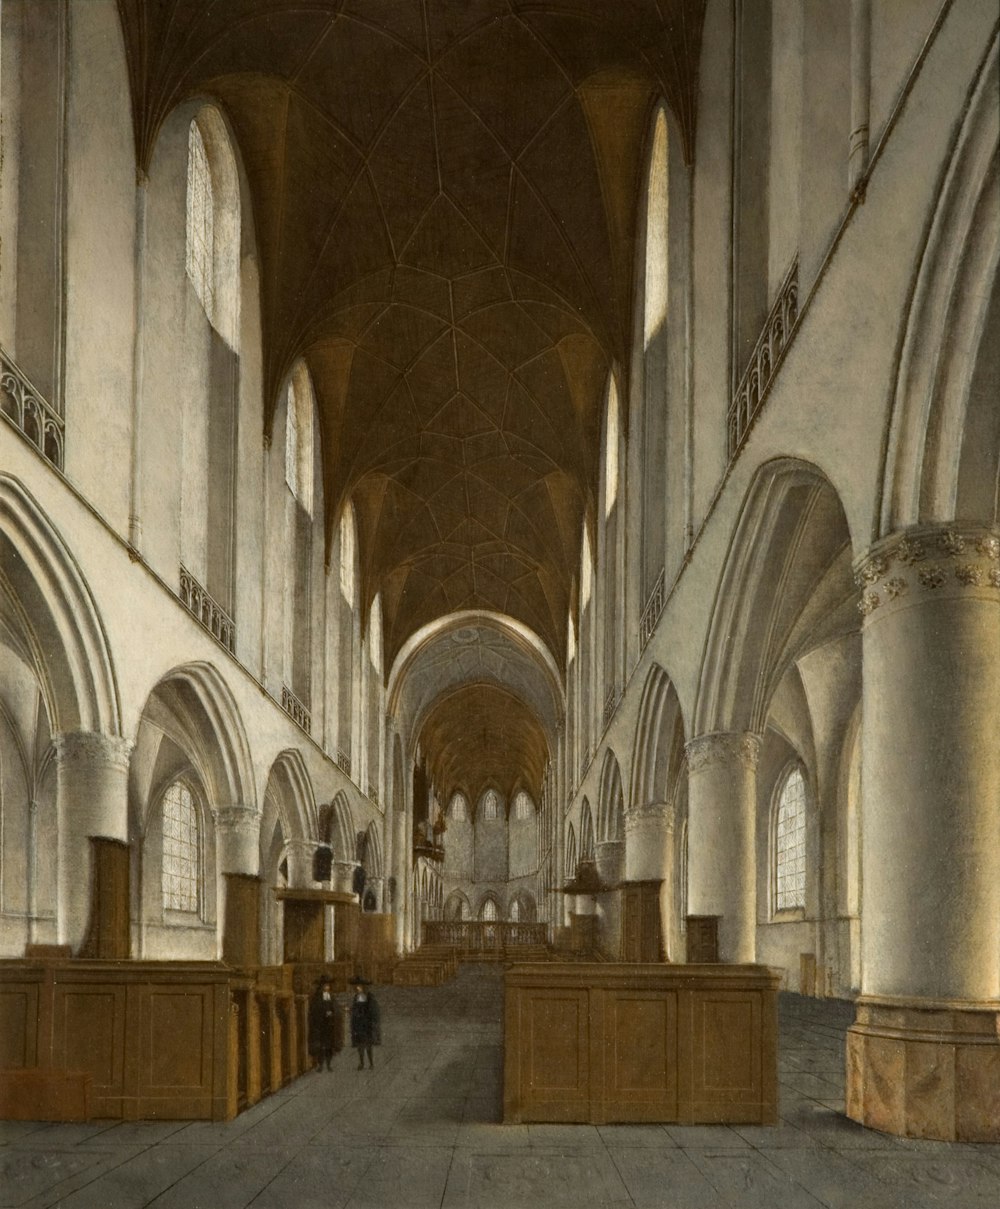 a painting of a large cathedral with pews